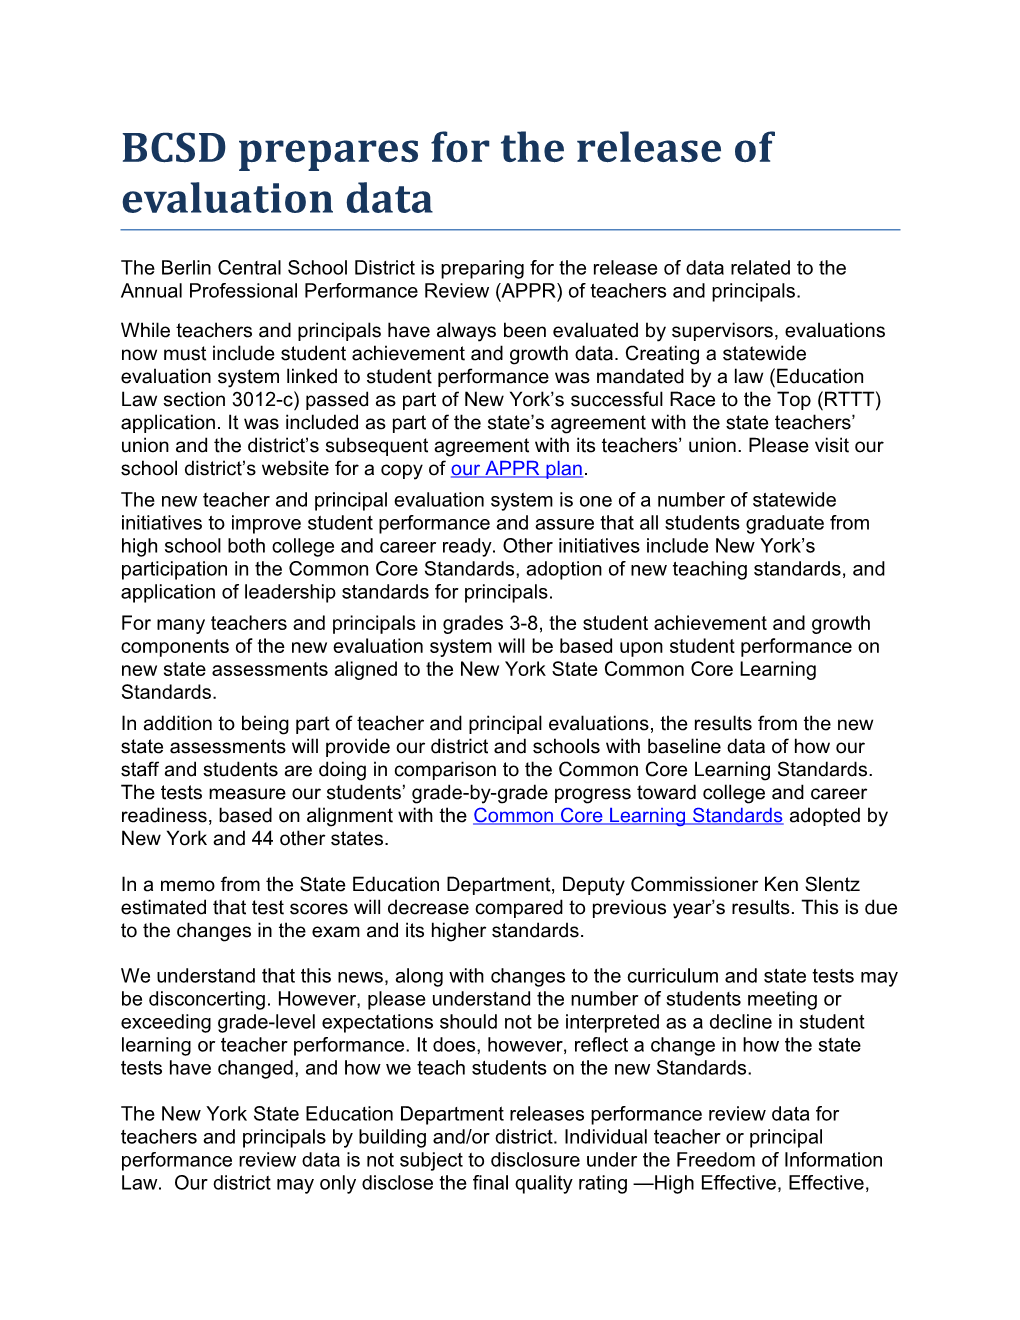 BCSD Prepares for the Release of Evaluation Data